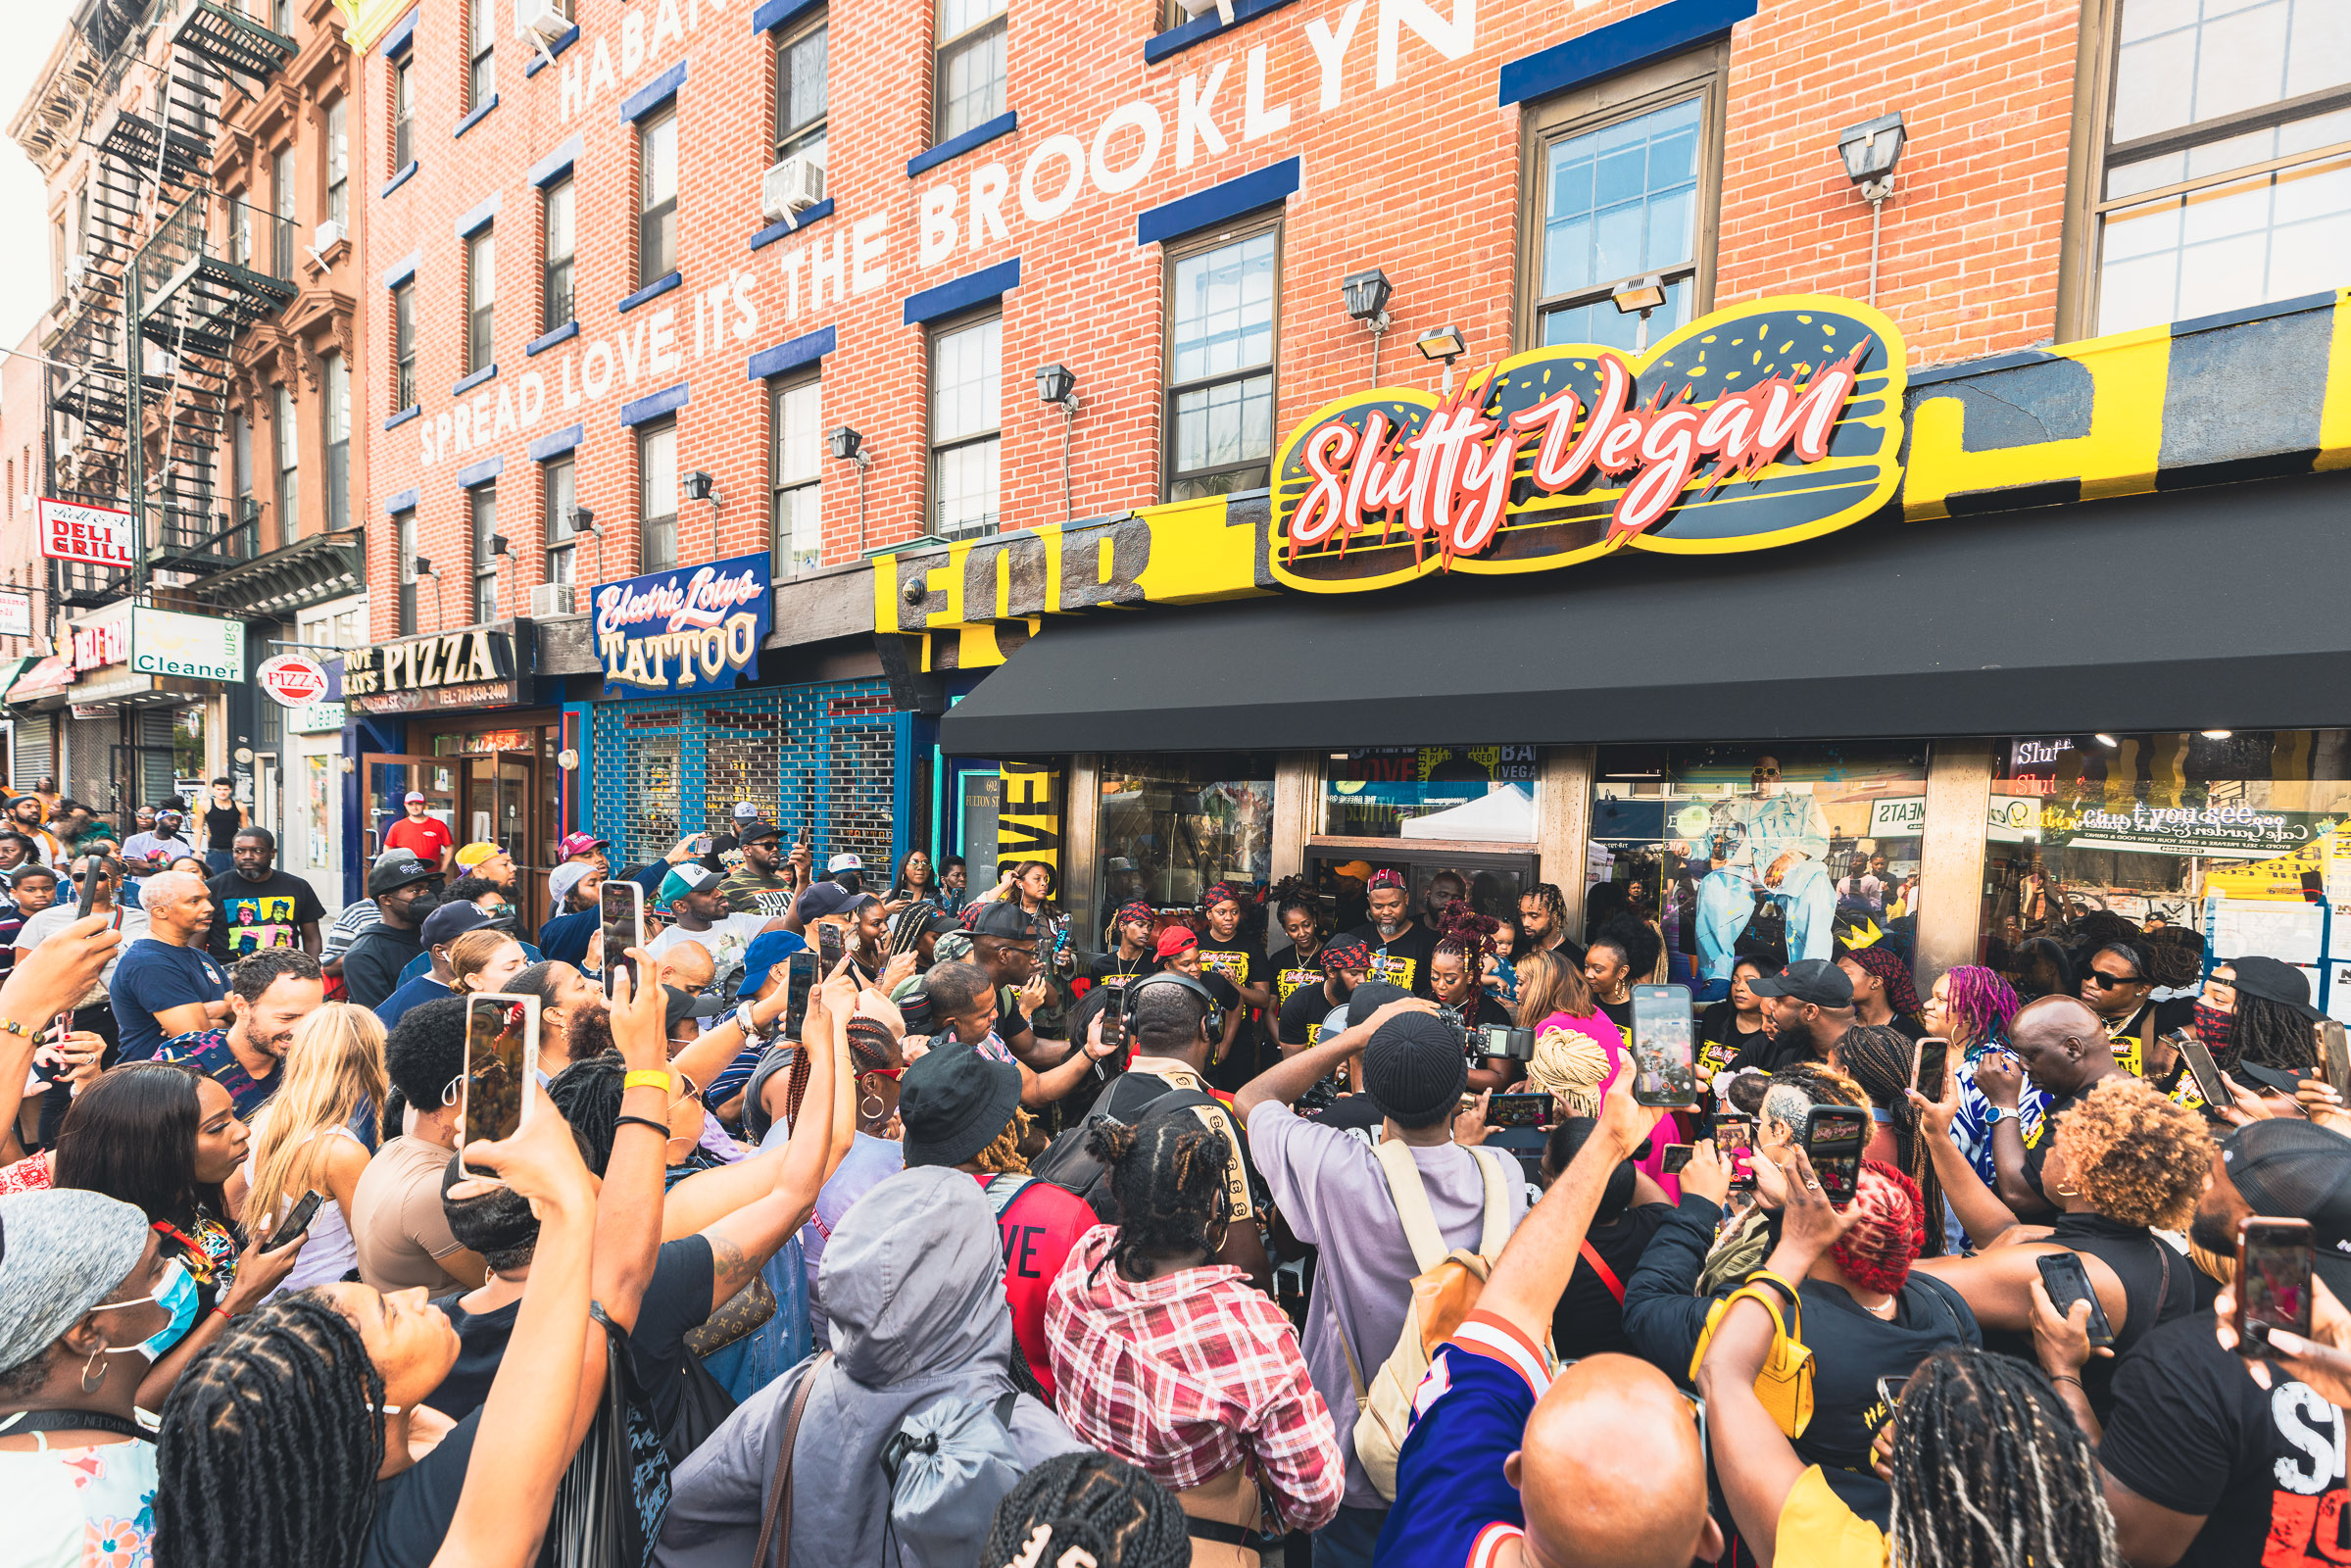 A sea of customers with iPhones and cameras gathers out front of Slutty Vegan in Brooklyn, New York.